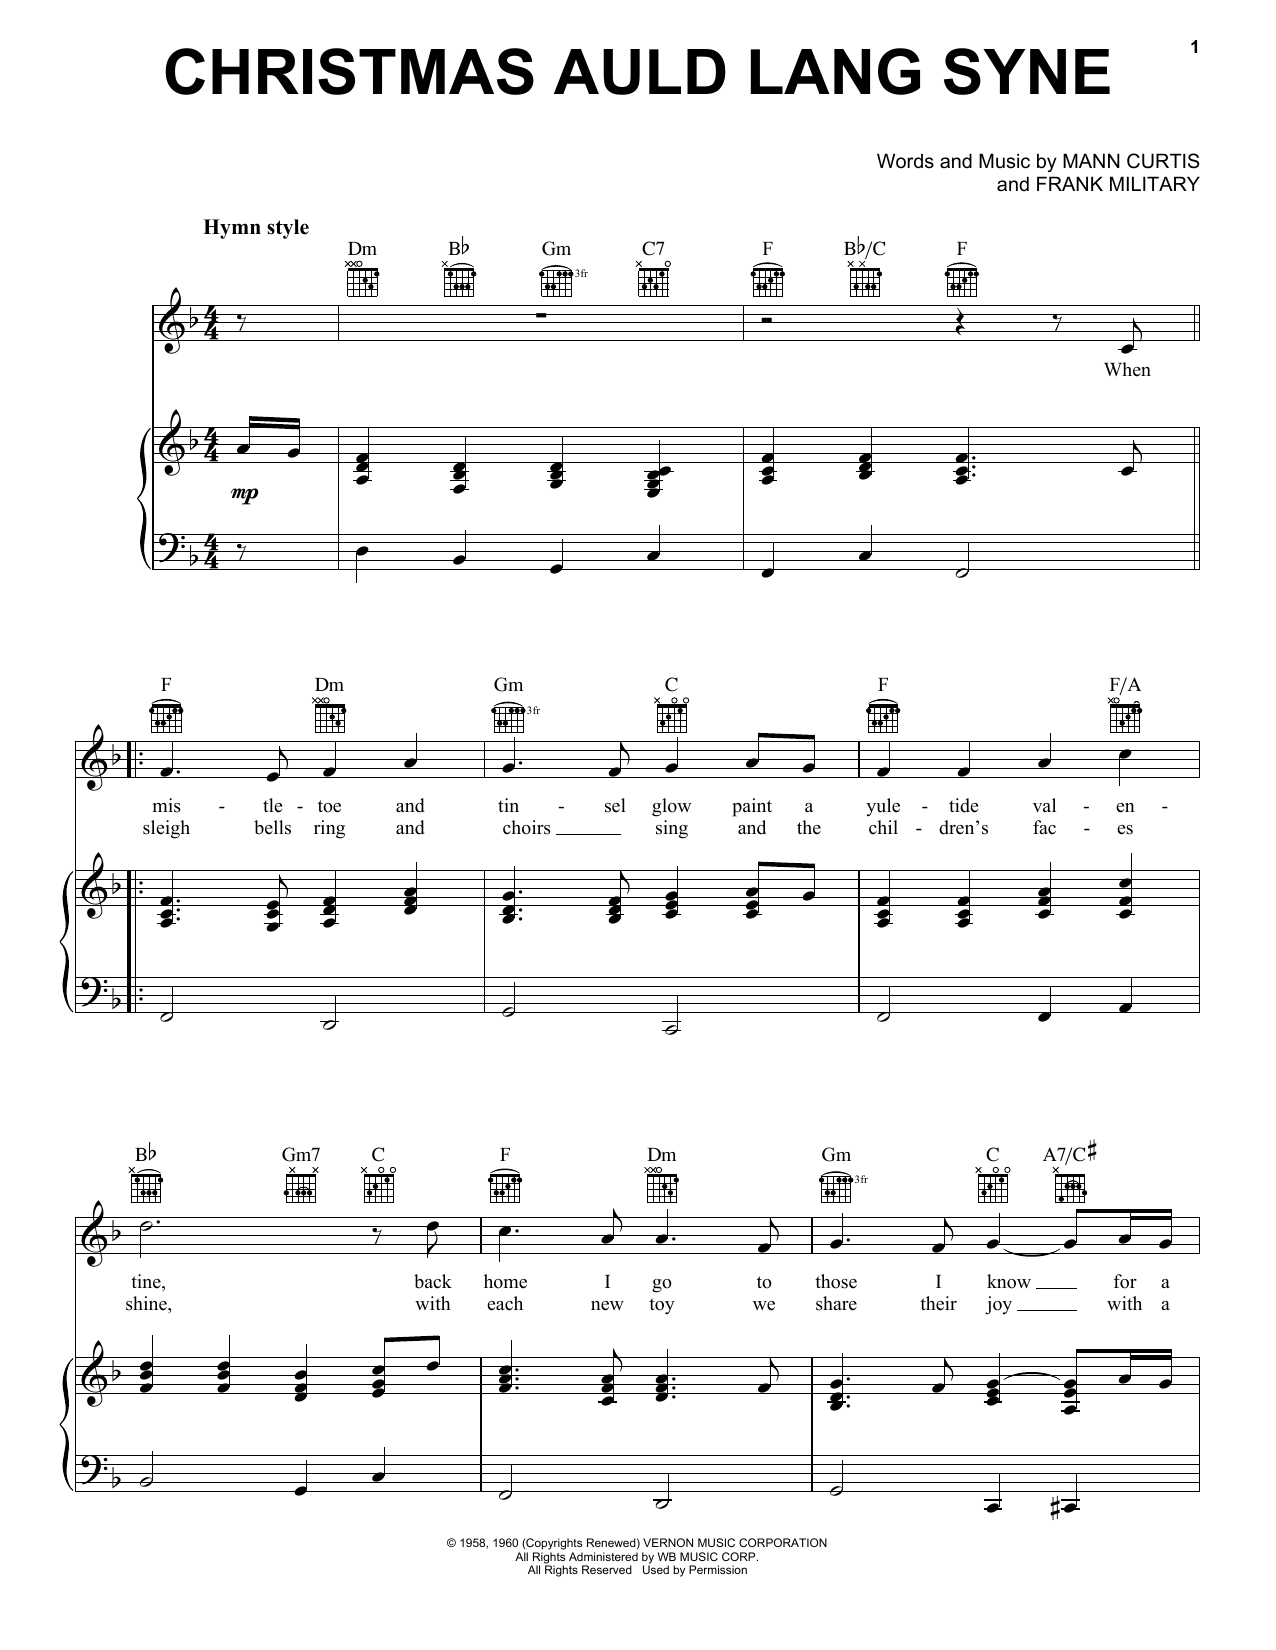 Download Frank Military Christmas Auld Lang Syne Sheet Music